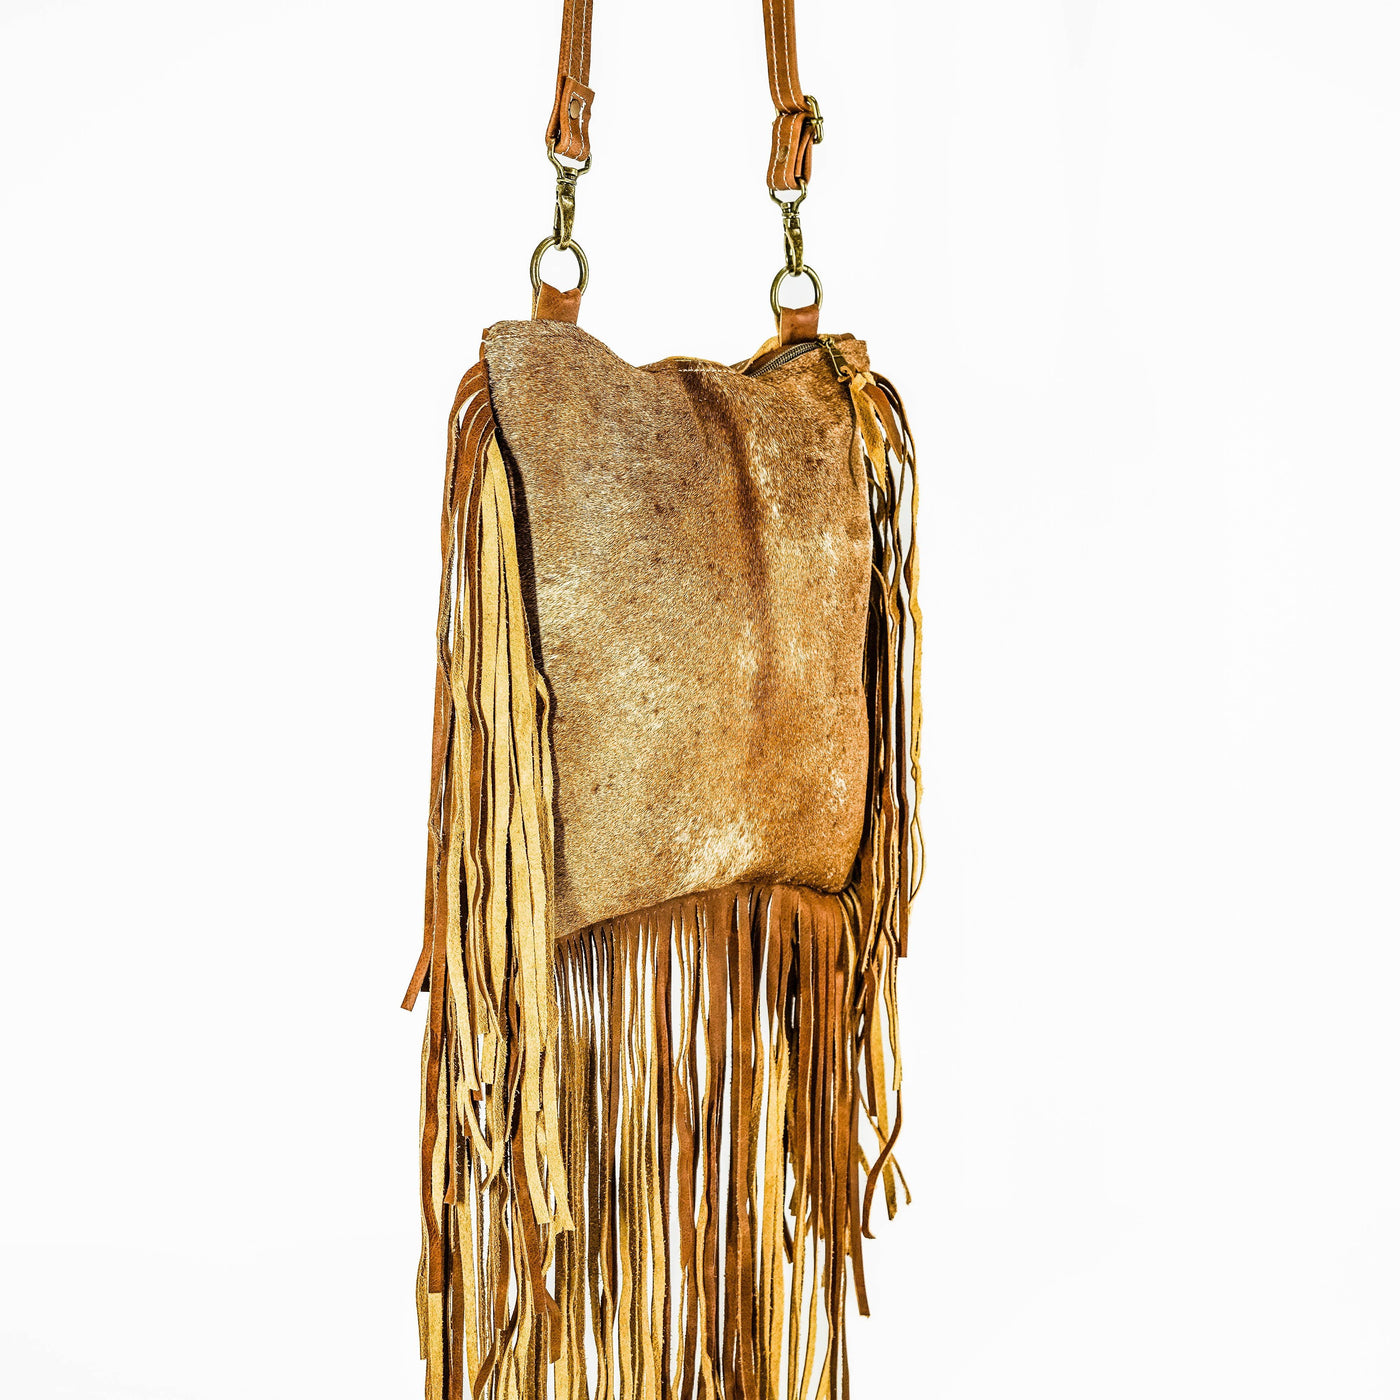 Shania (unlined) - Palomino Hide w/ No Embossed-Shania (unlined)-Western-Cowhide-Bags-Handmade-Products-Gifts-Dancing Cactus Designs